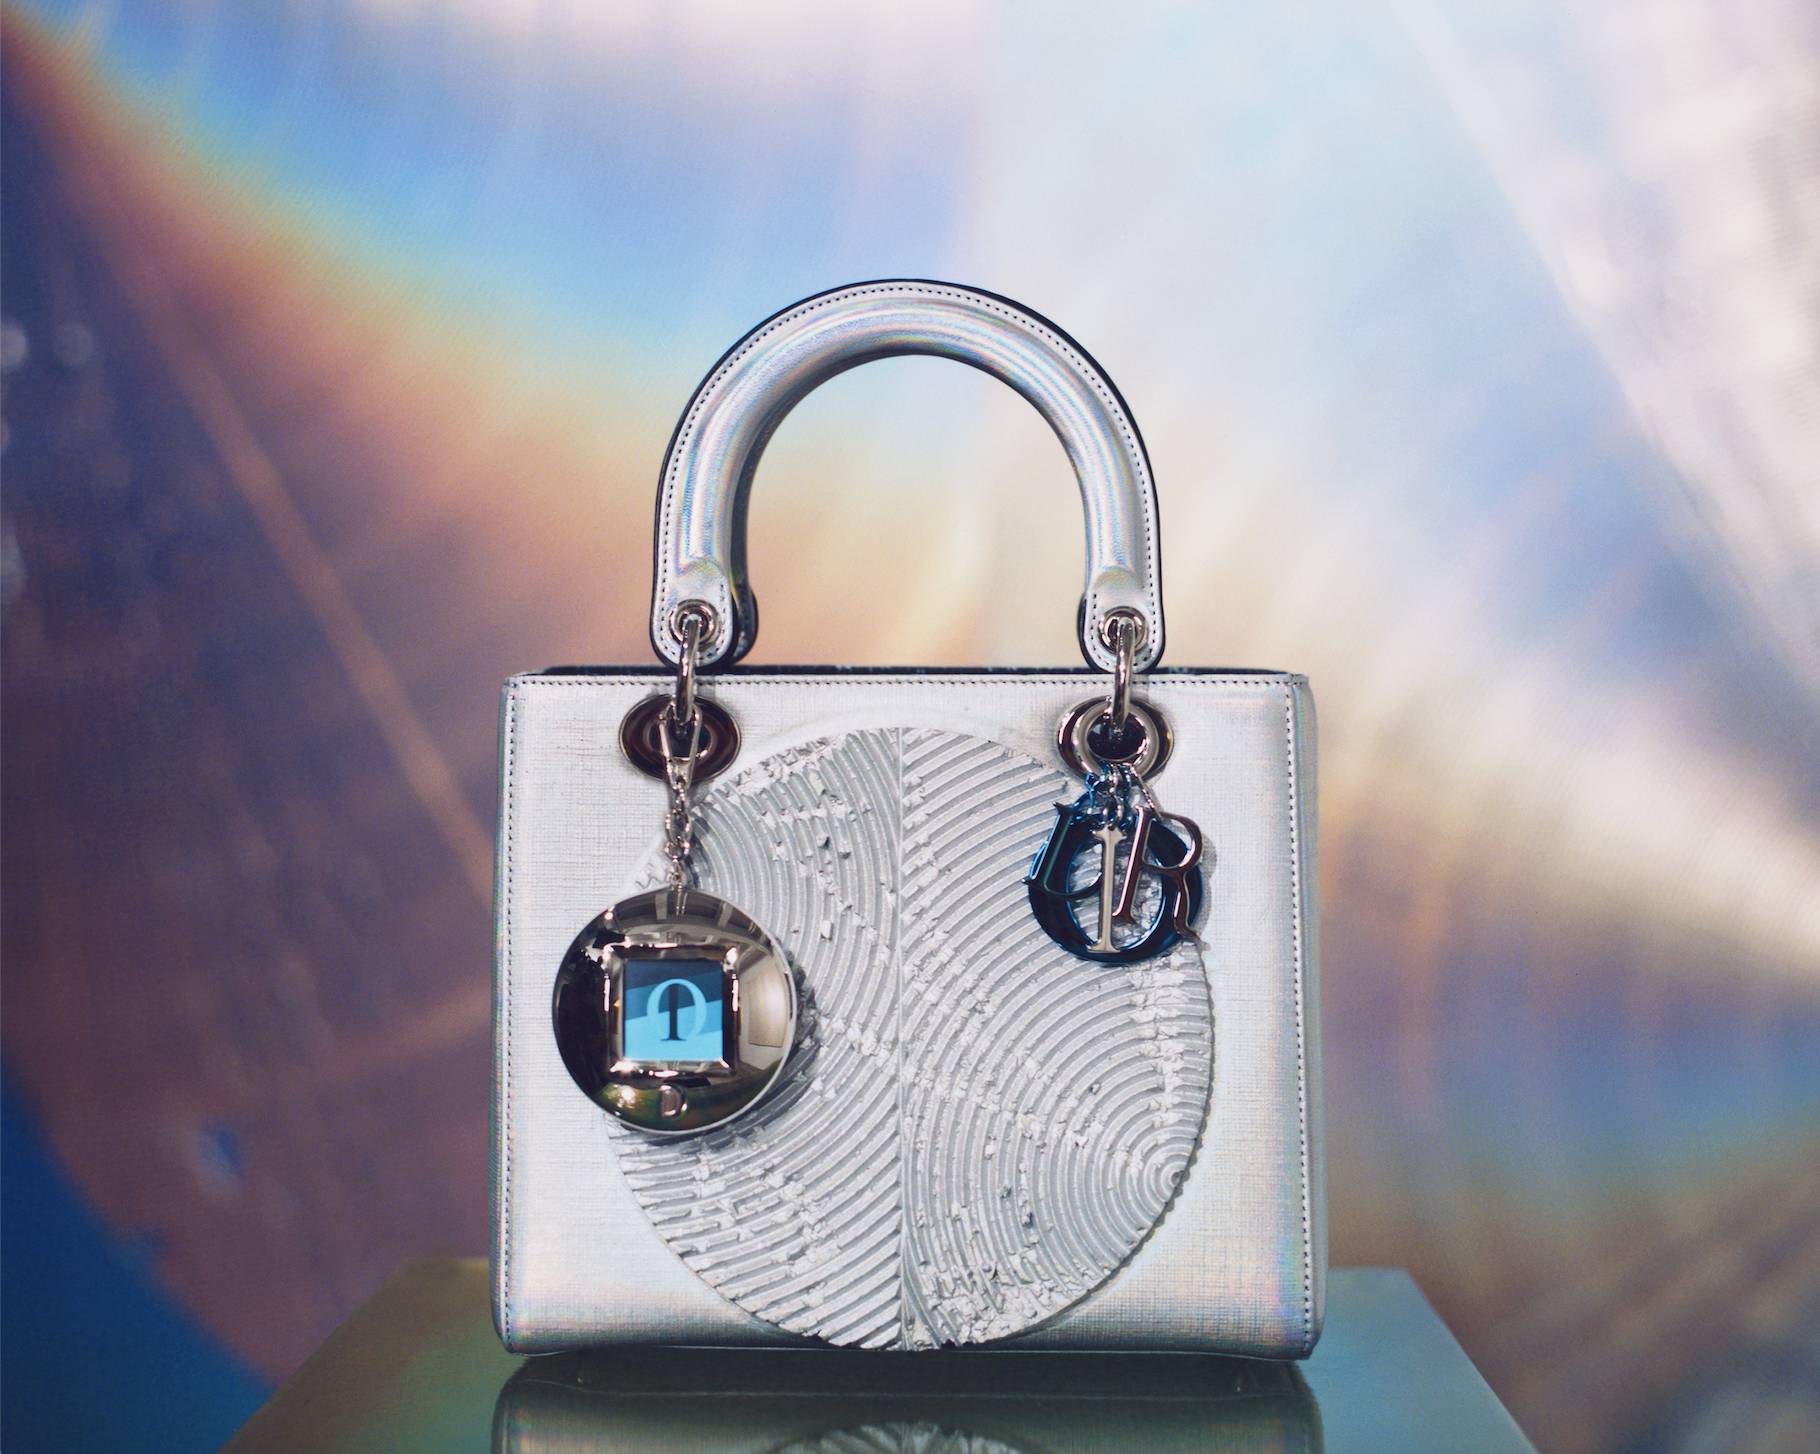 Dior Unveils Latest Iterations From The Lady Dior Art Project